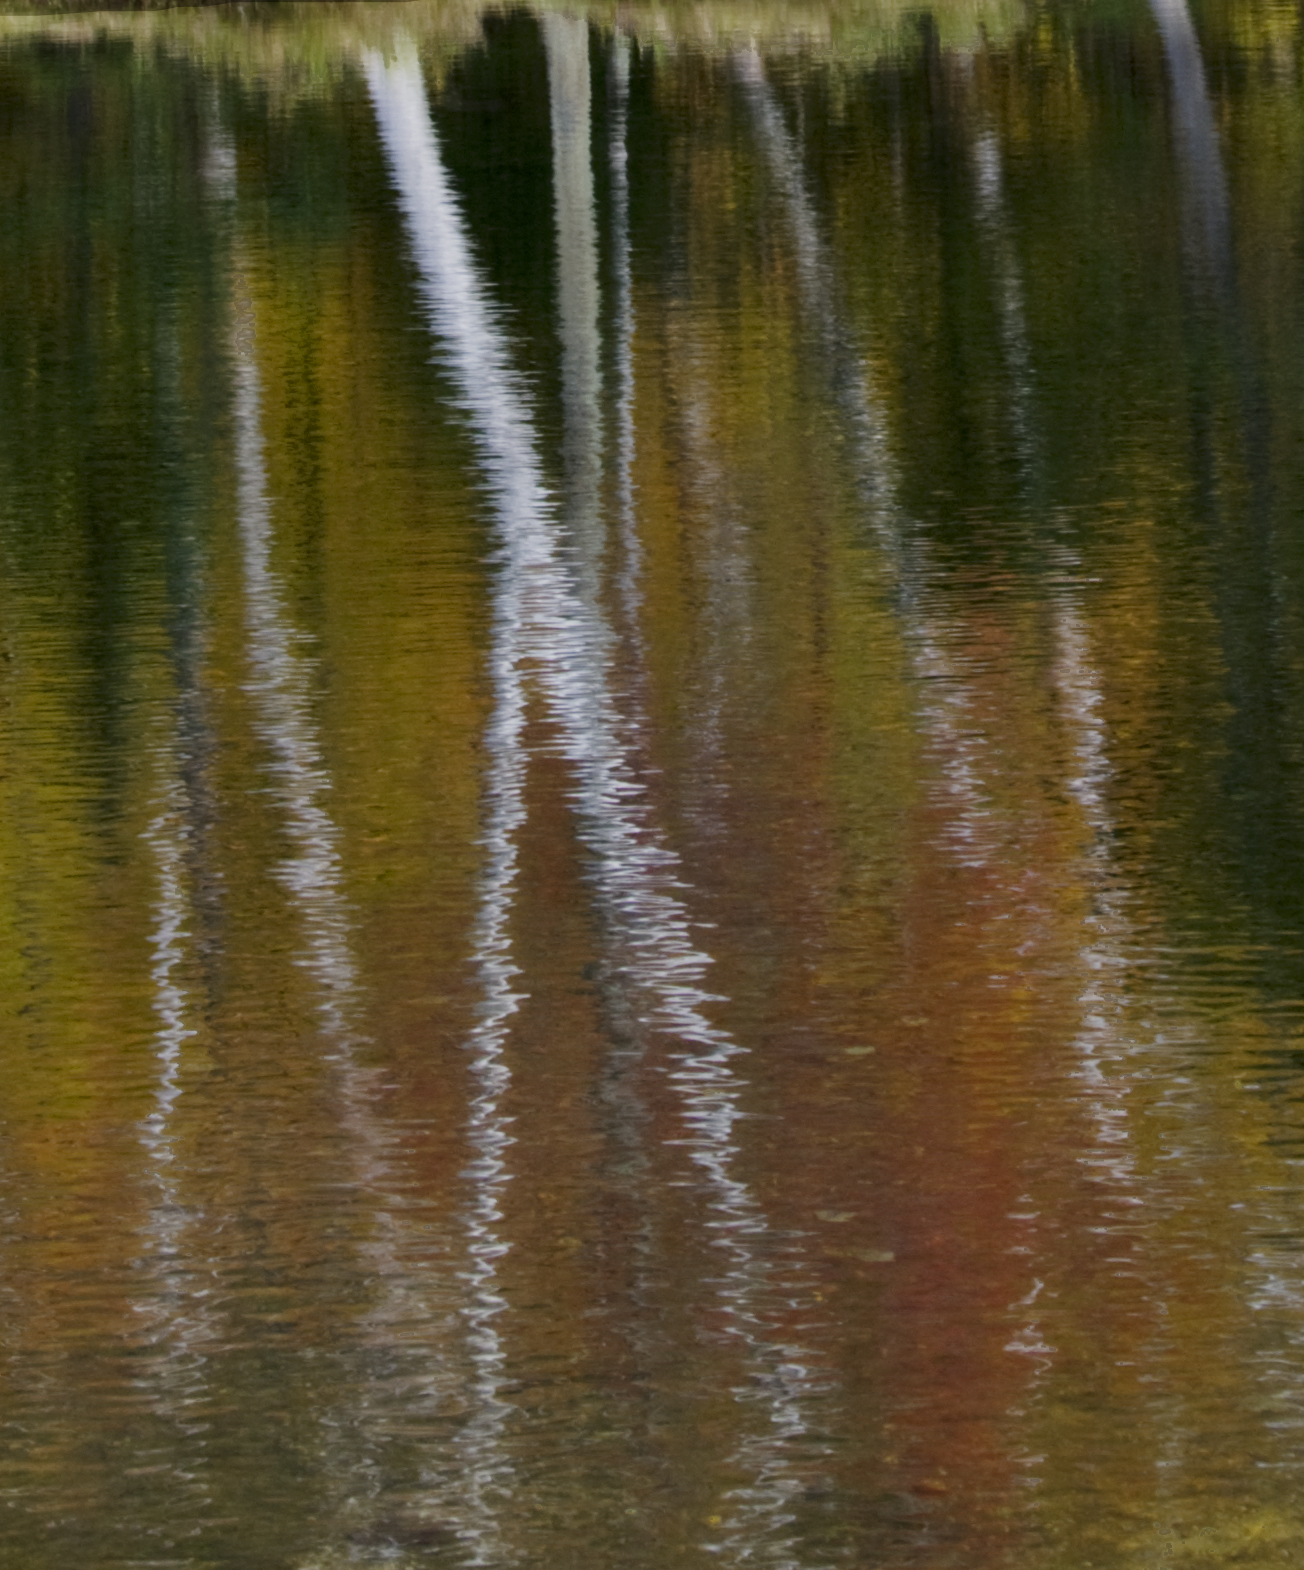 Crawford Notch Reflection (user submitted)